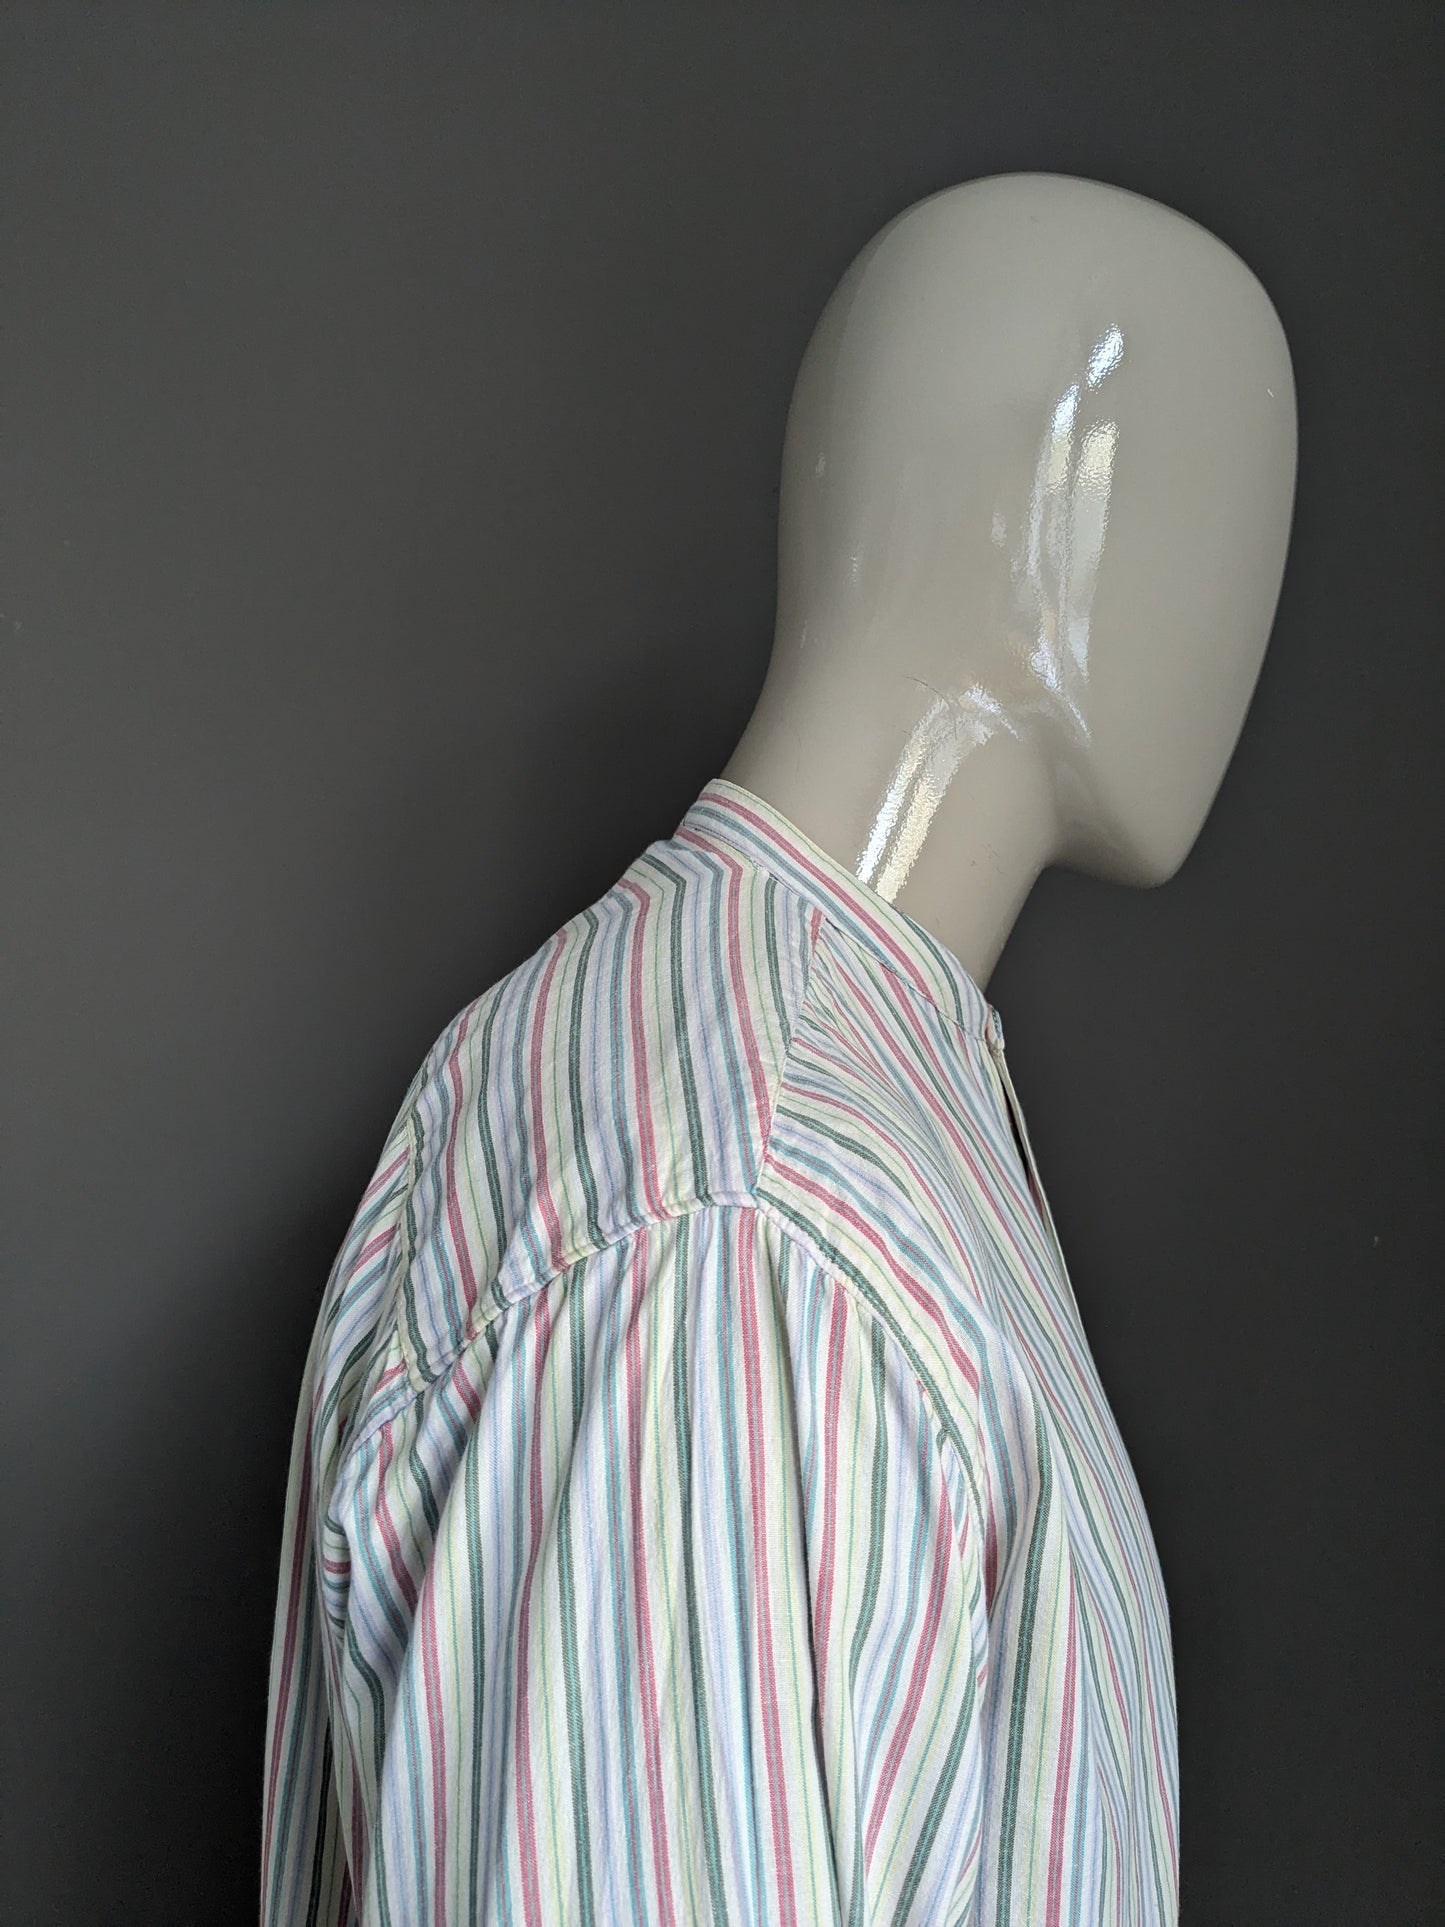 Vintage McBlue shirt with Mao / Farmer / Standing Collar. Yellow green red blue striped. Size XL.